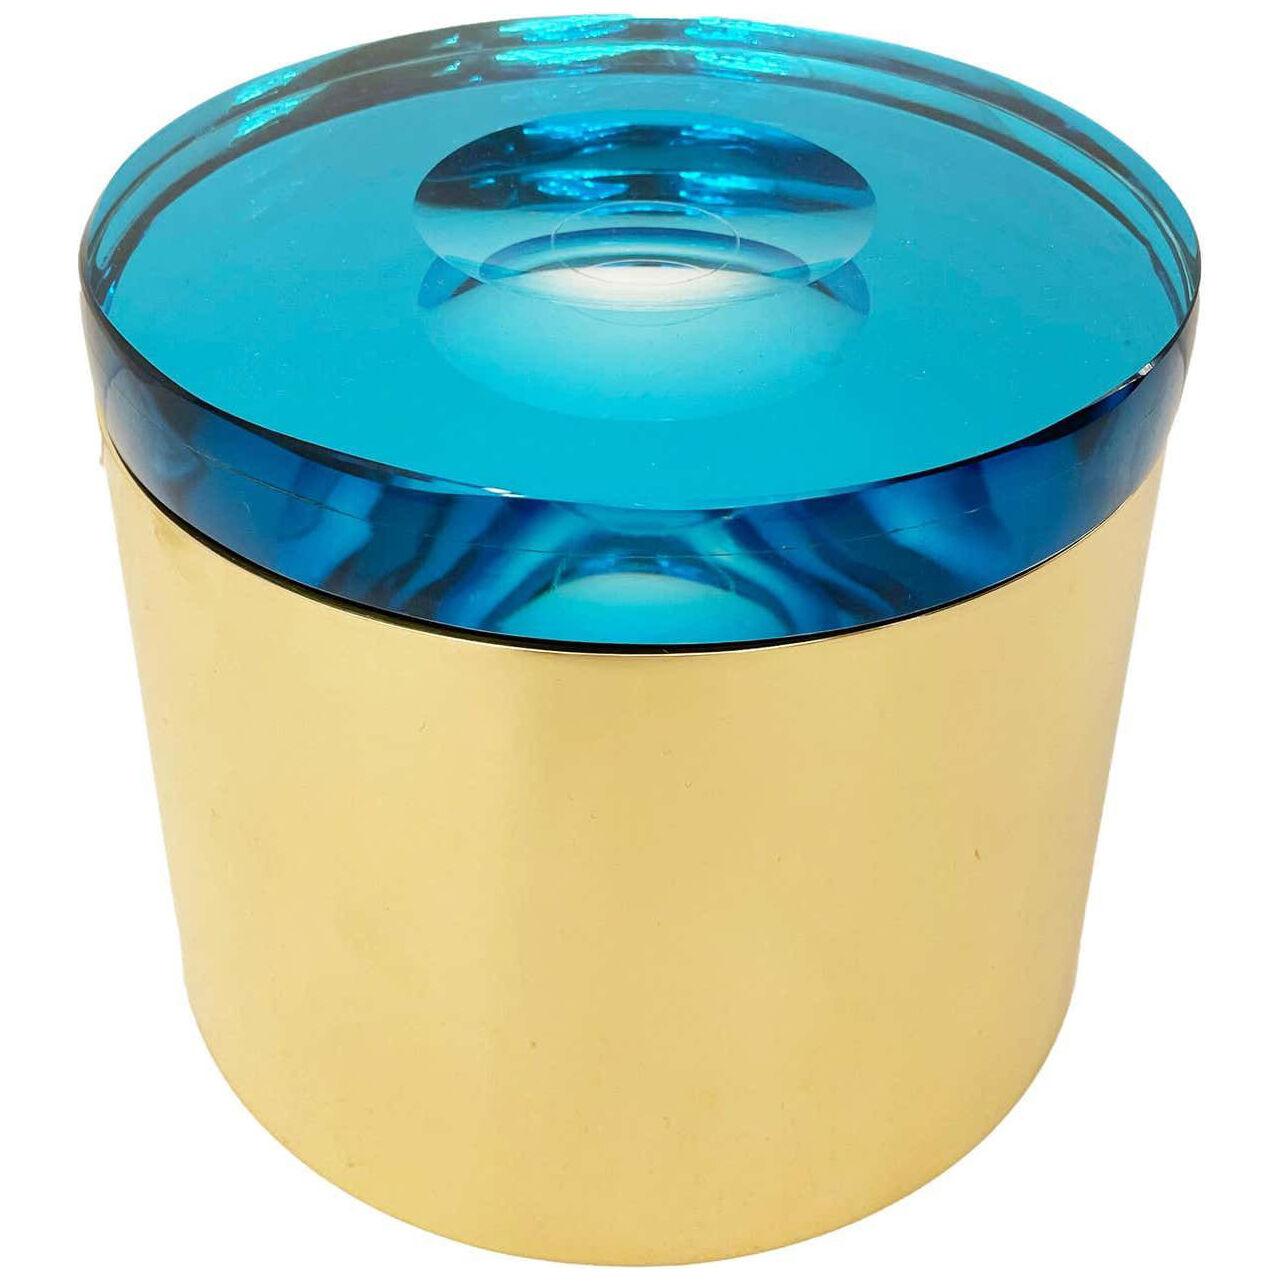 Candela Glass Box. Turquoise Glass and Brass Base